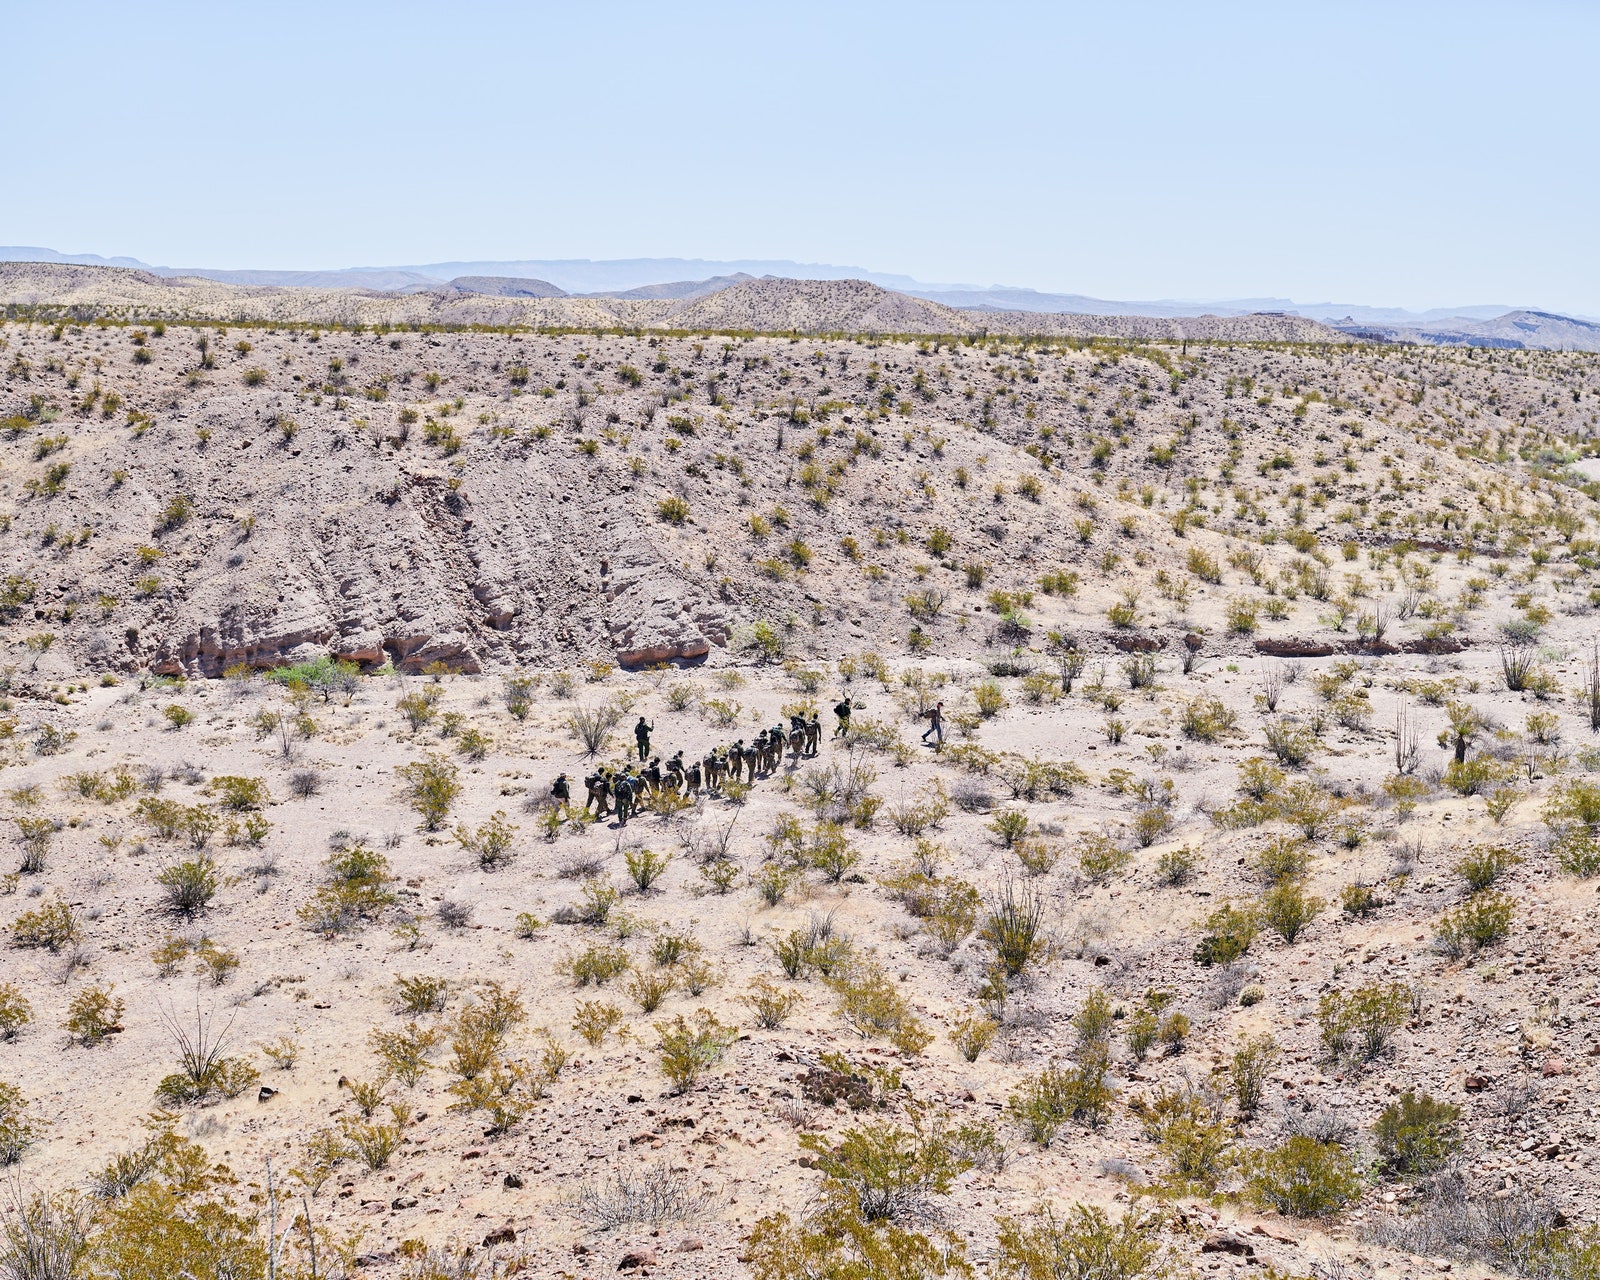 The landscape of the southern border as seen from above with a group of people in the distance.